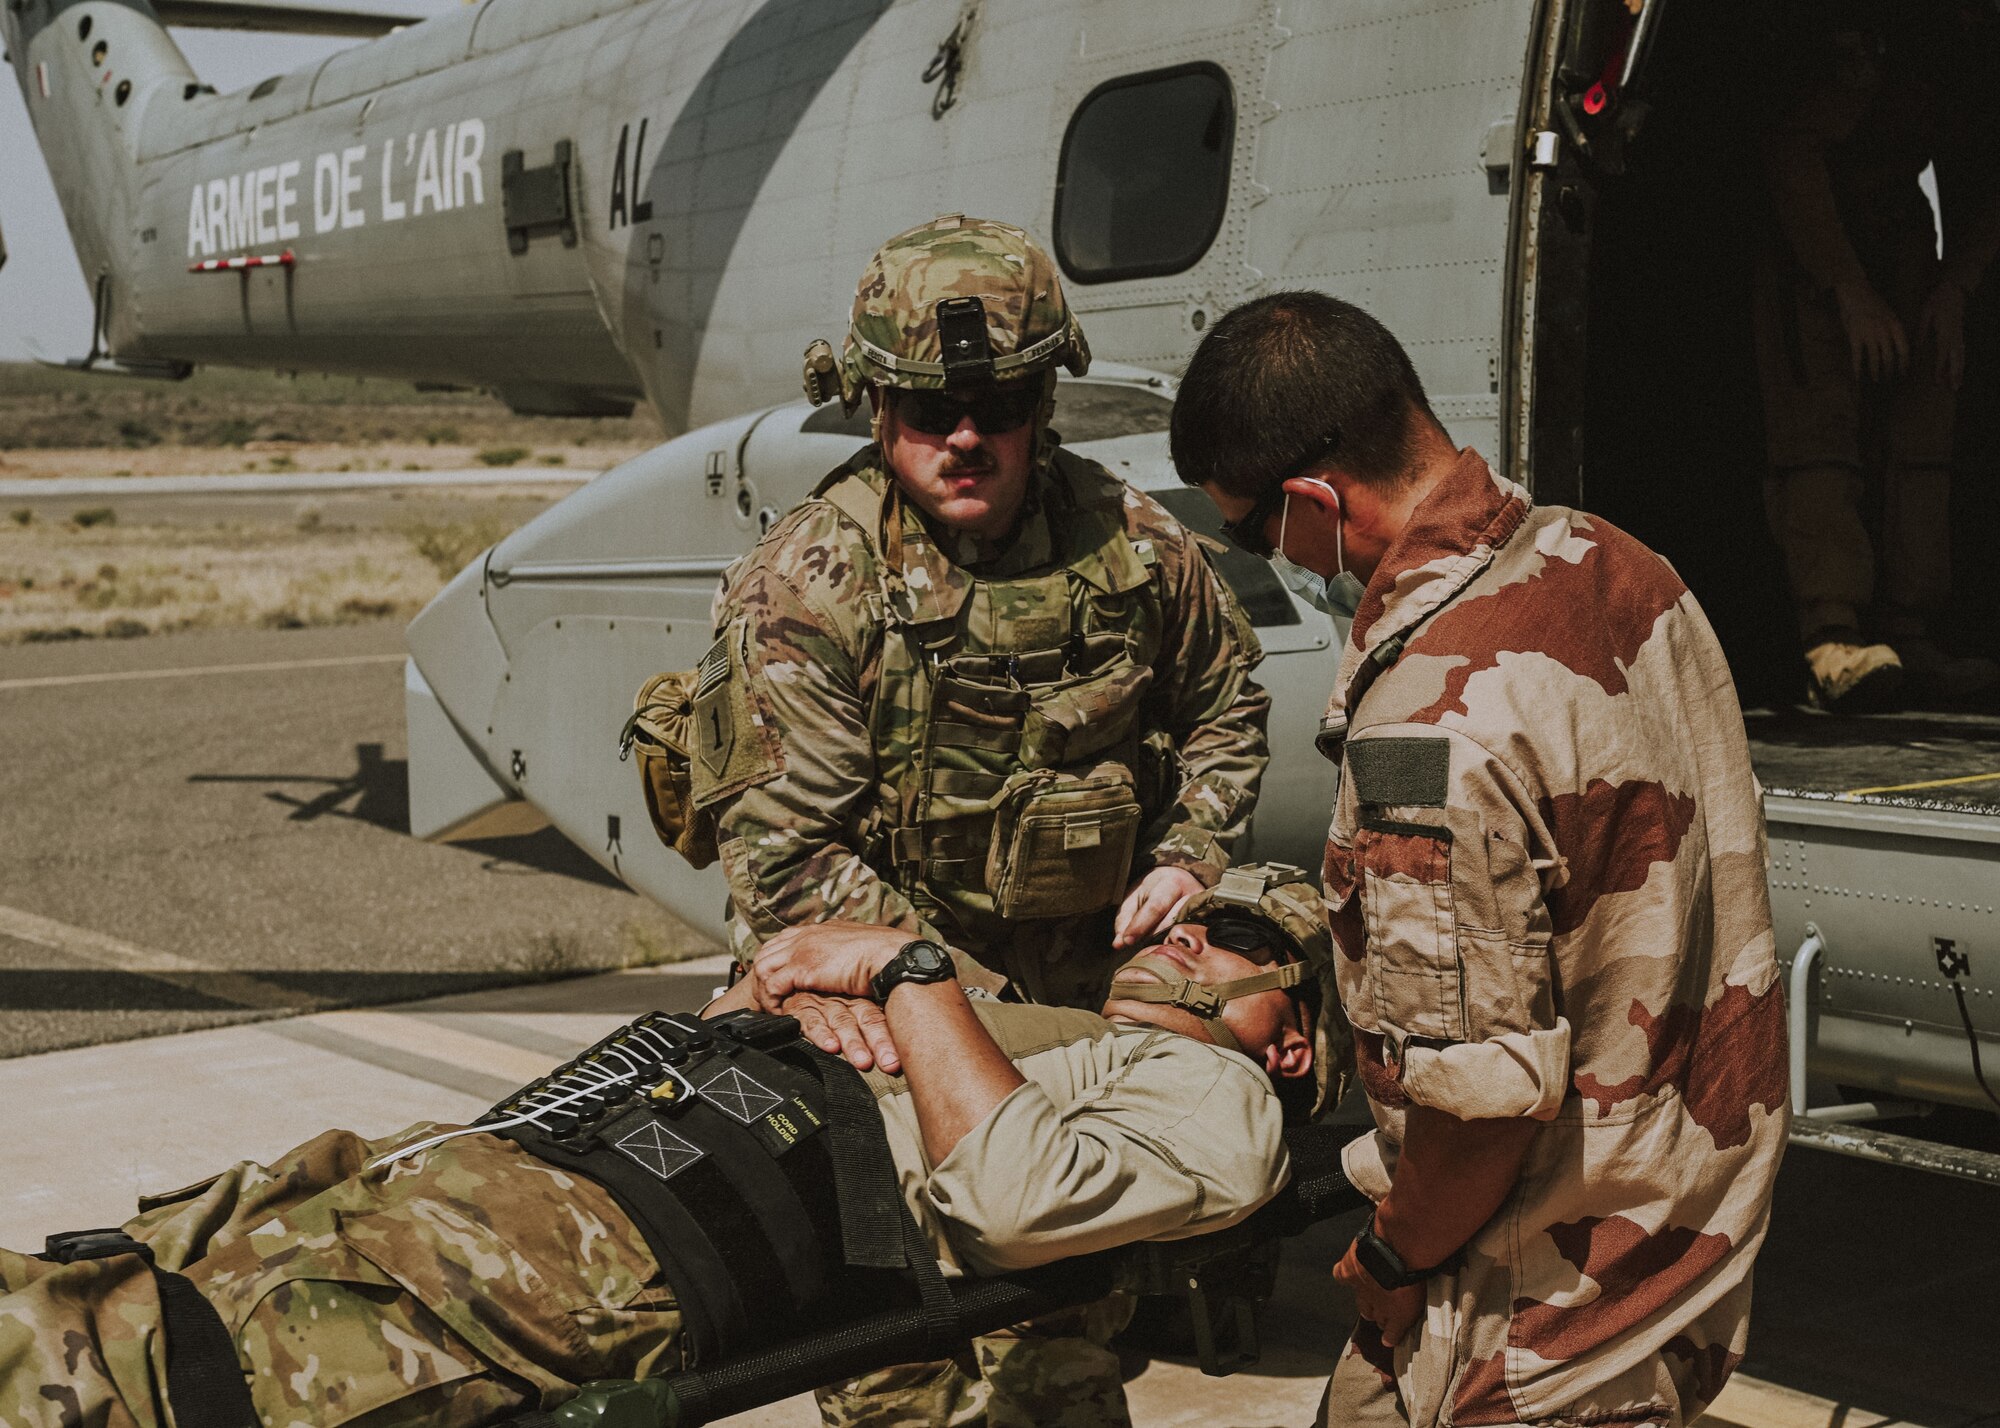 A soldier from Task Force Iron Gray and a French Air Force member load a simulated injured service member onto a French aircraft in support of the medical evacuation exercise May 31, 2021, at Chabelley Airfield, Djibouti. The French Air Force took initiative to provide their aircraft in order to transfer the simulated injured patients from Chabelley Airfield to Camp Lemonnier in Djibouti. (U. S. Air Force photo by Airman 1st Class Jan K. Valle)